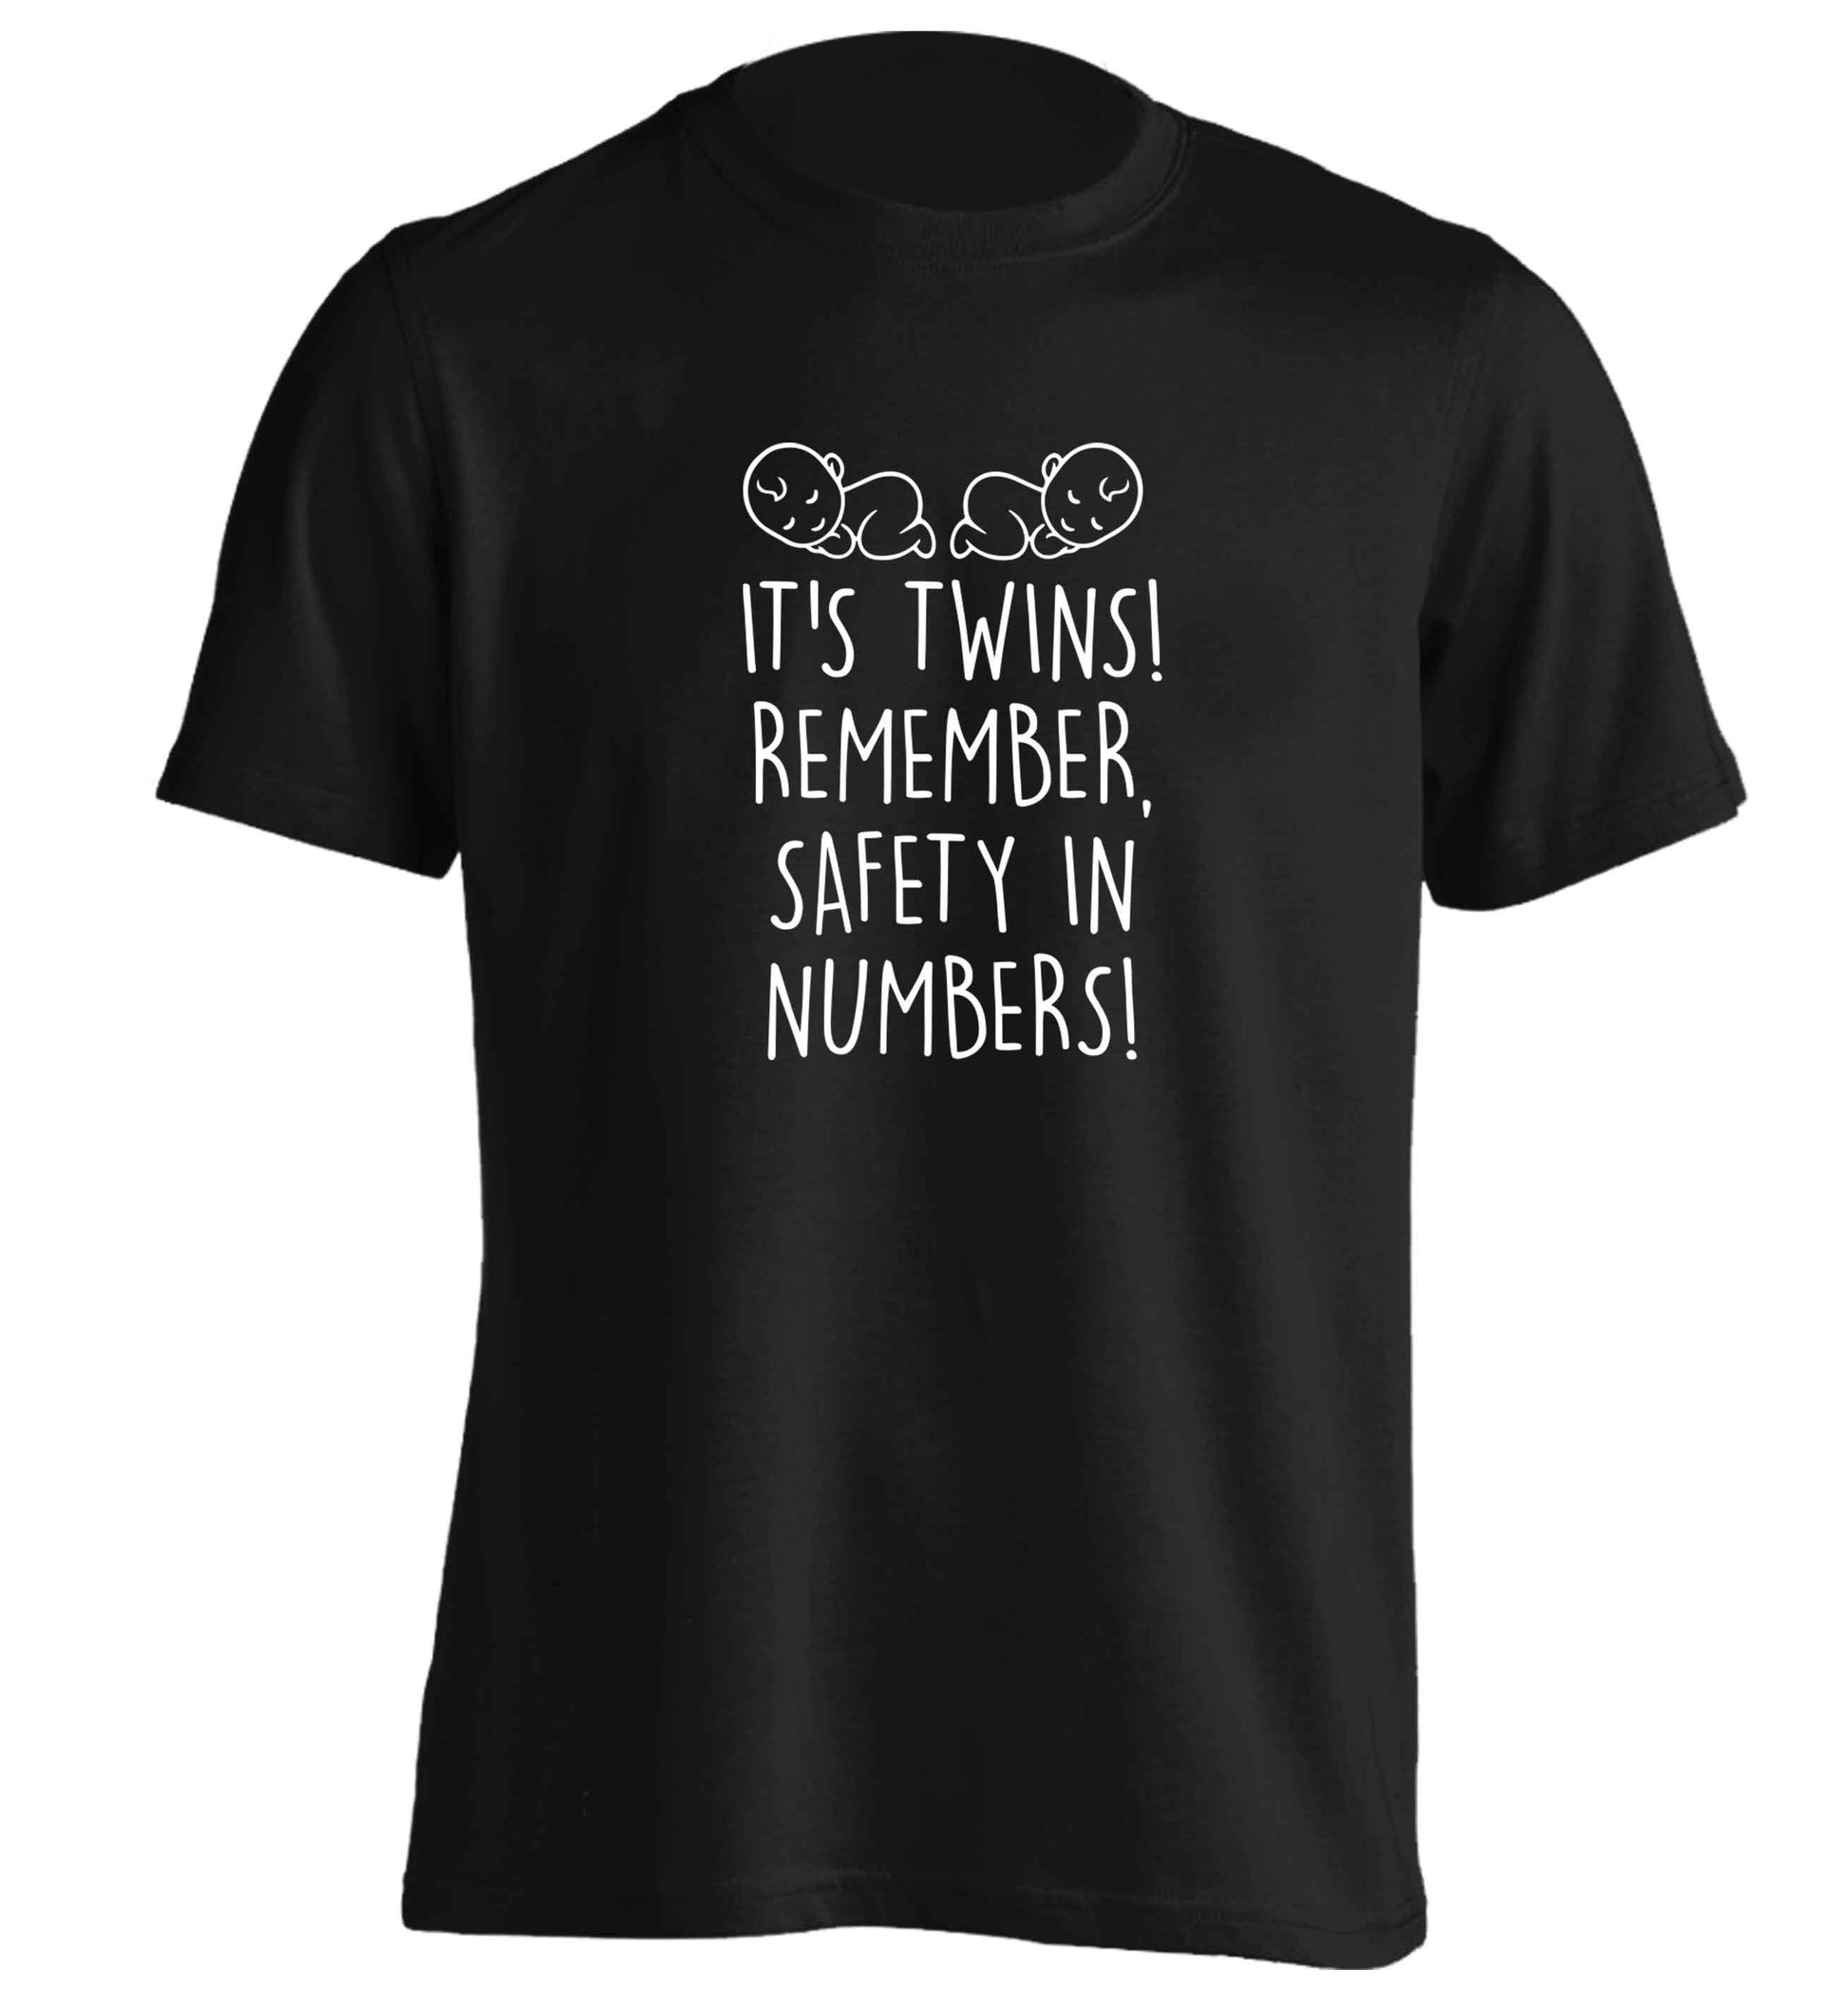 It's twins! Remember safety in numbers! adults unisex black Tshirt 2XL